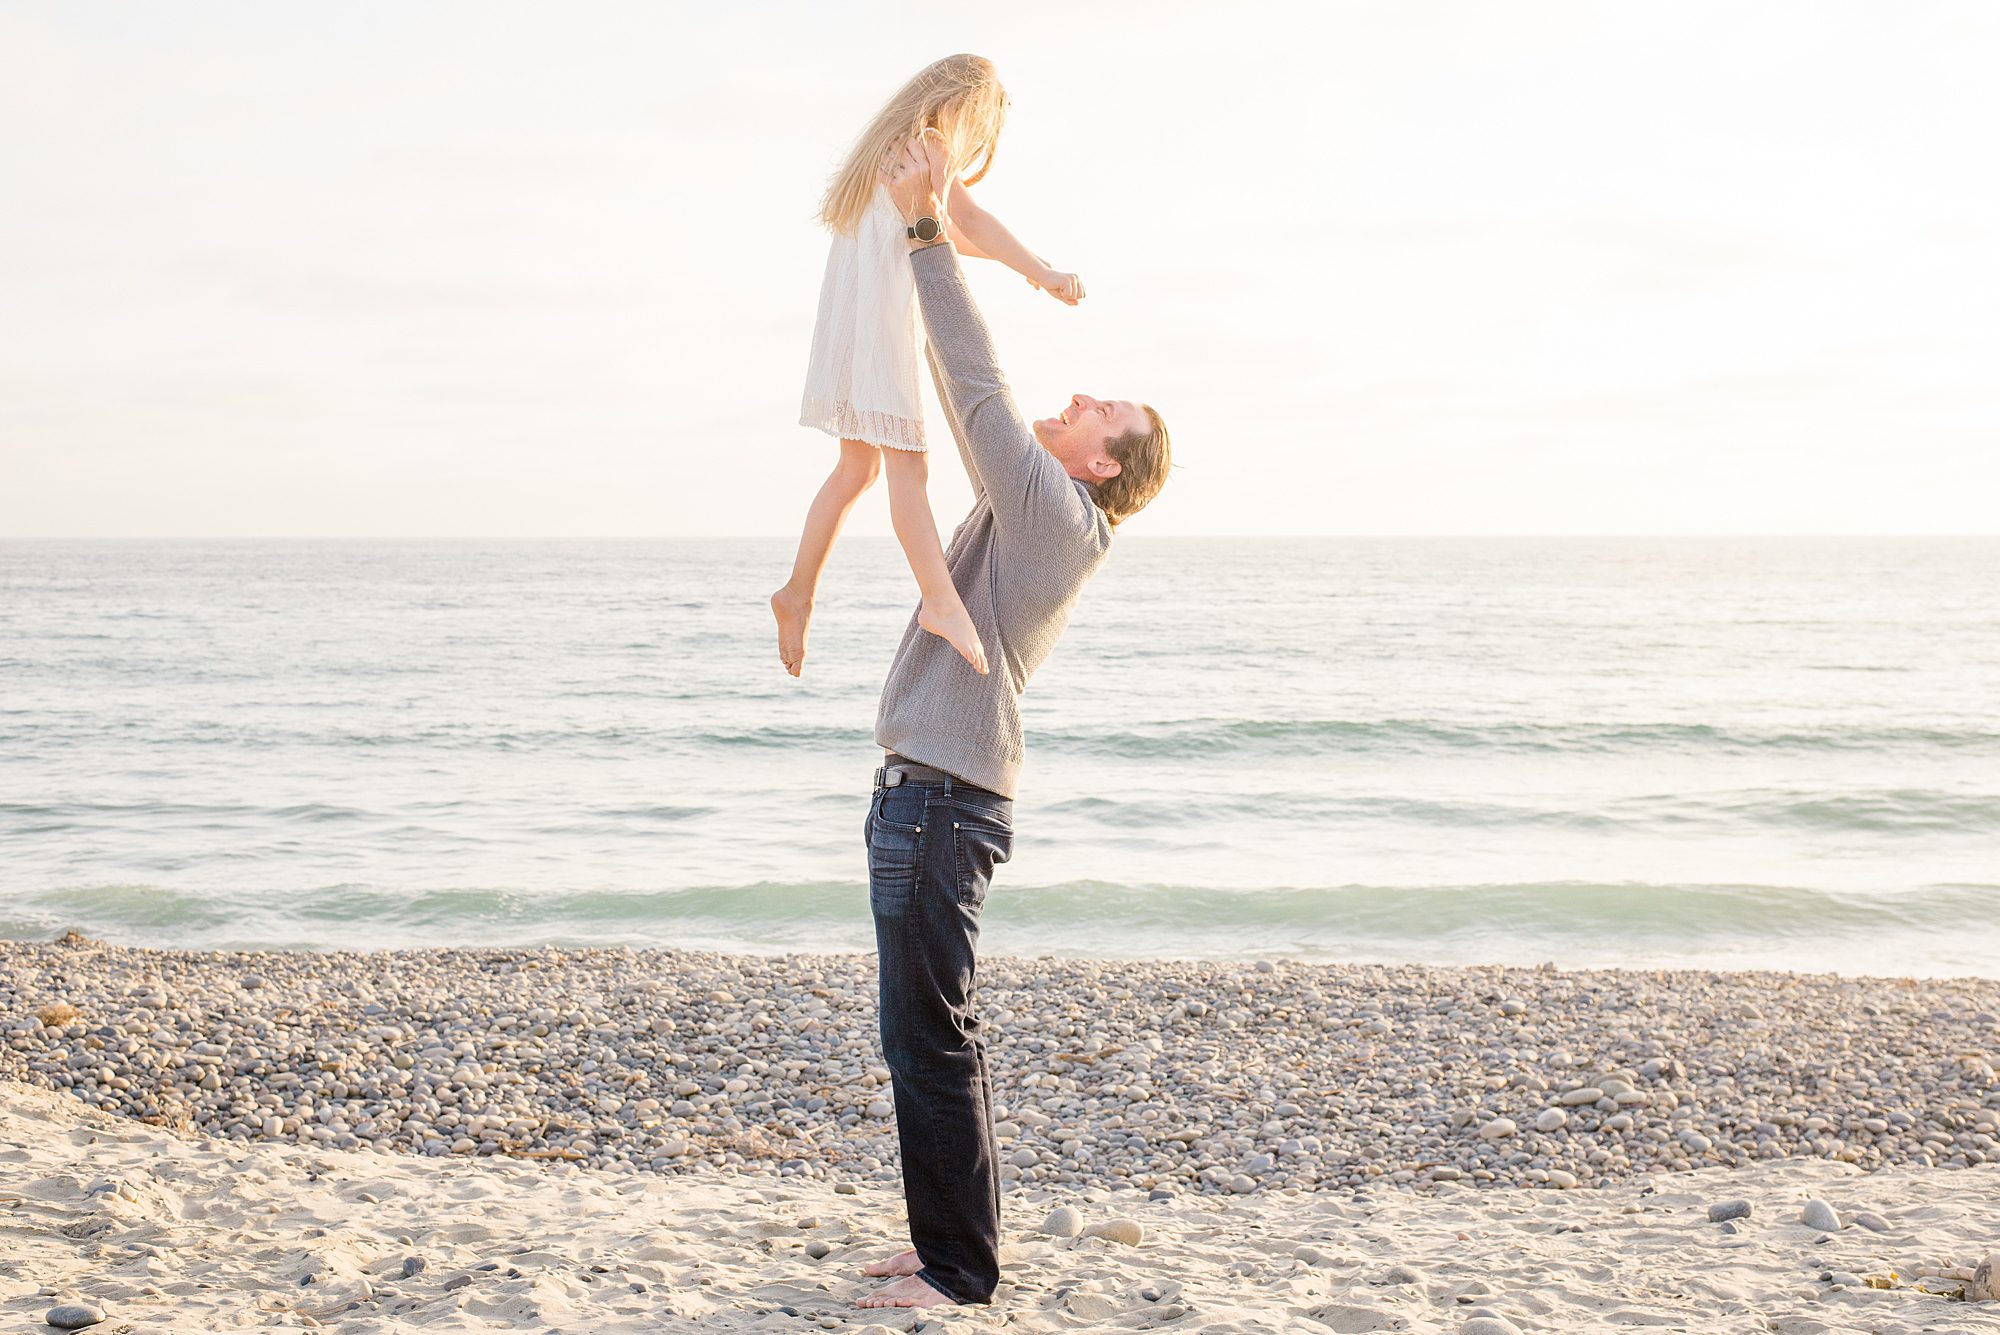 dad lifts his daughter up in the air 